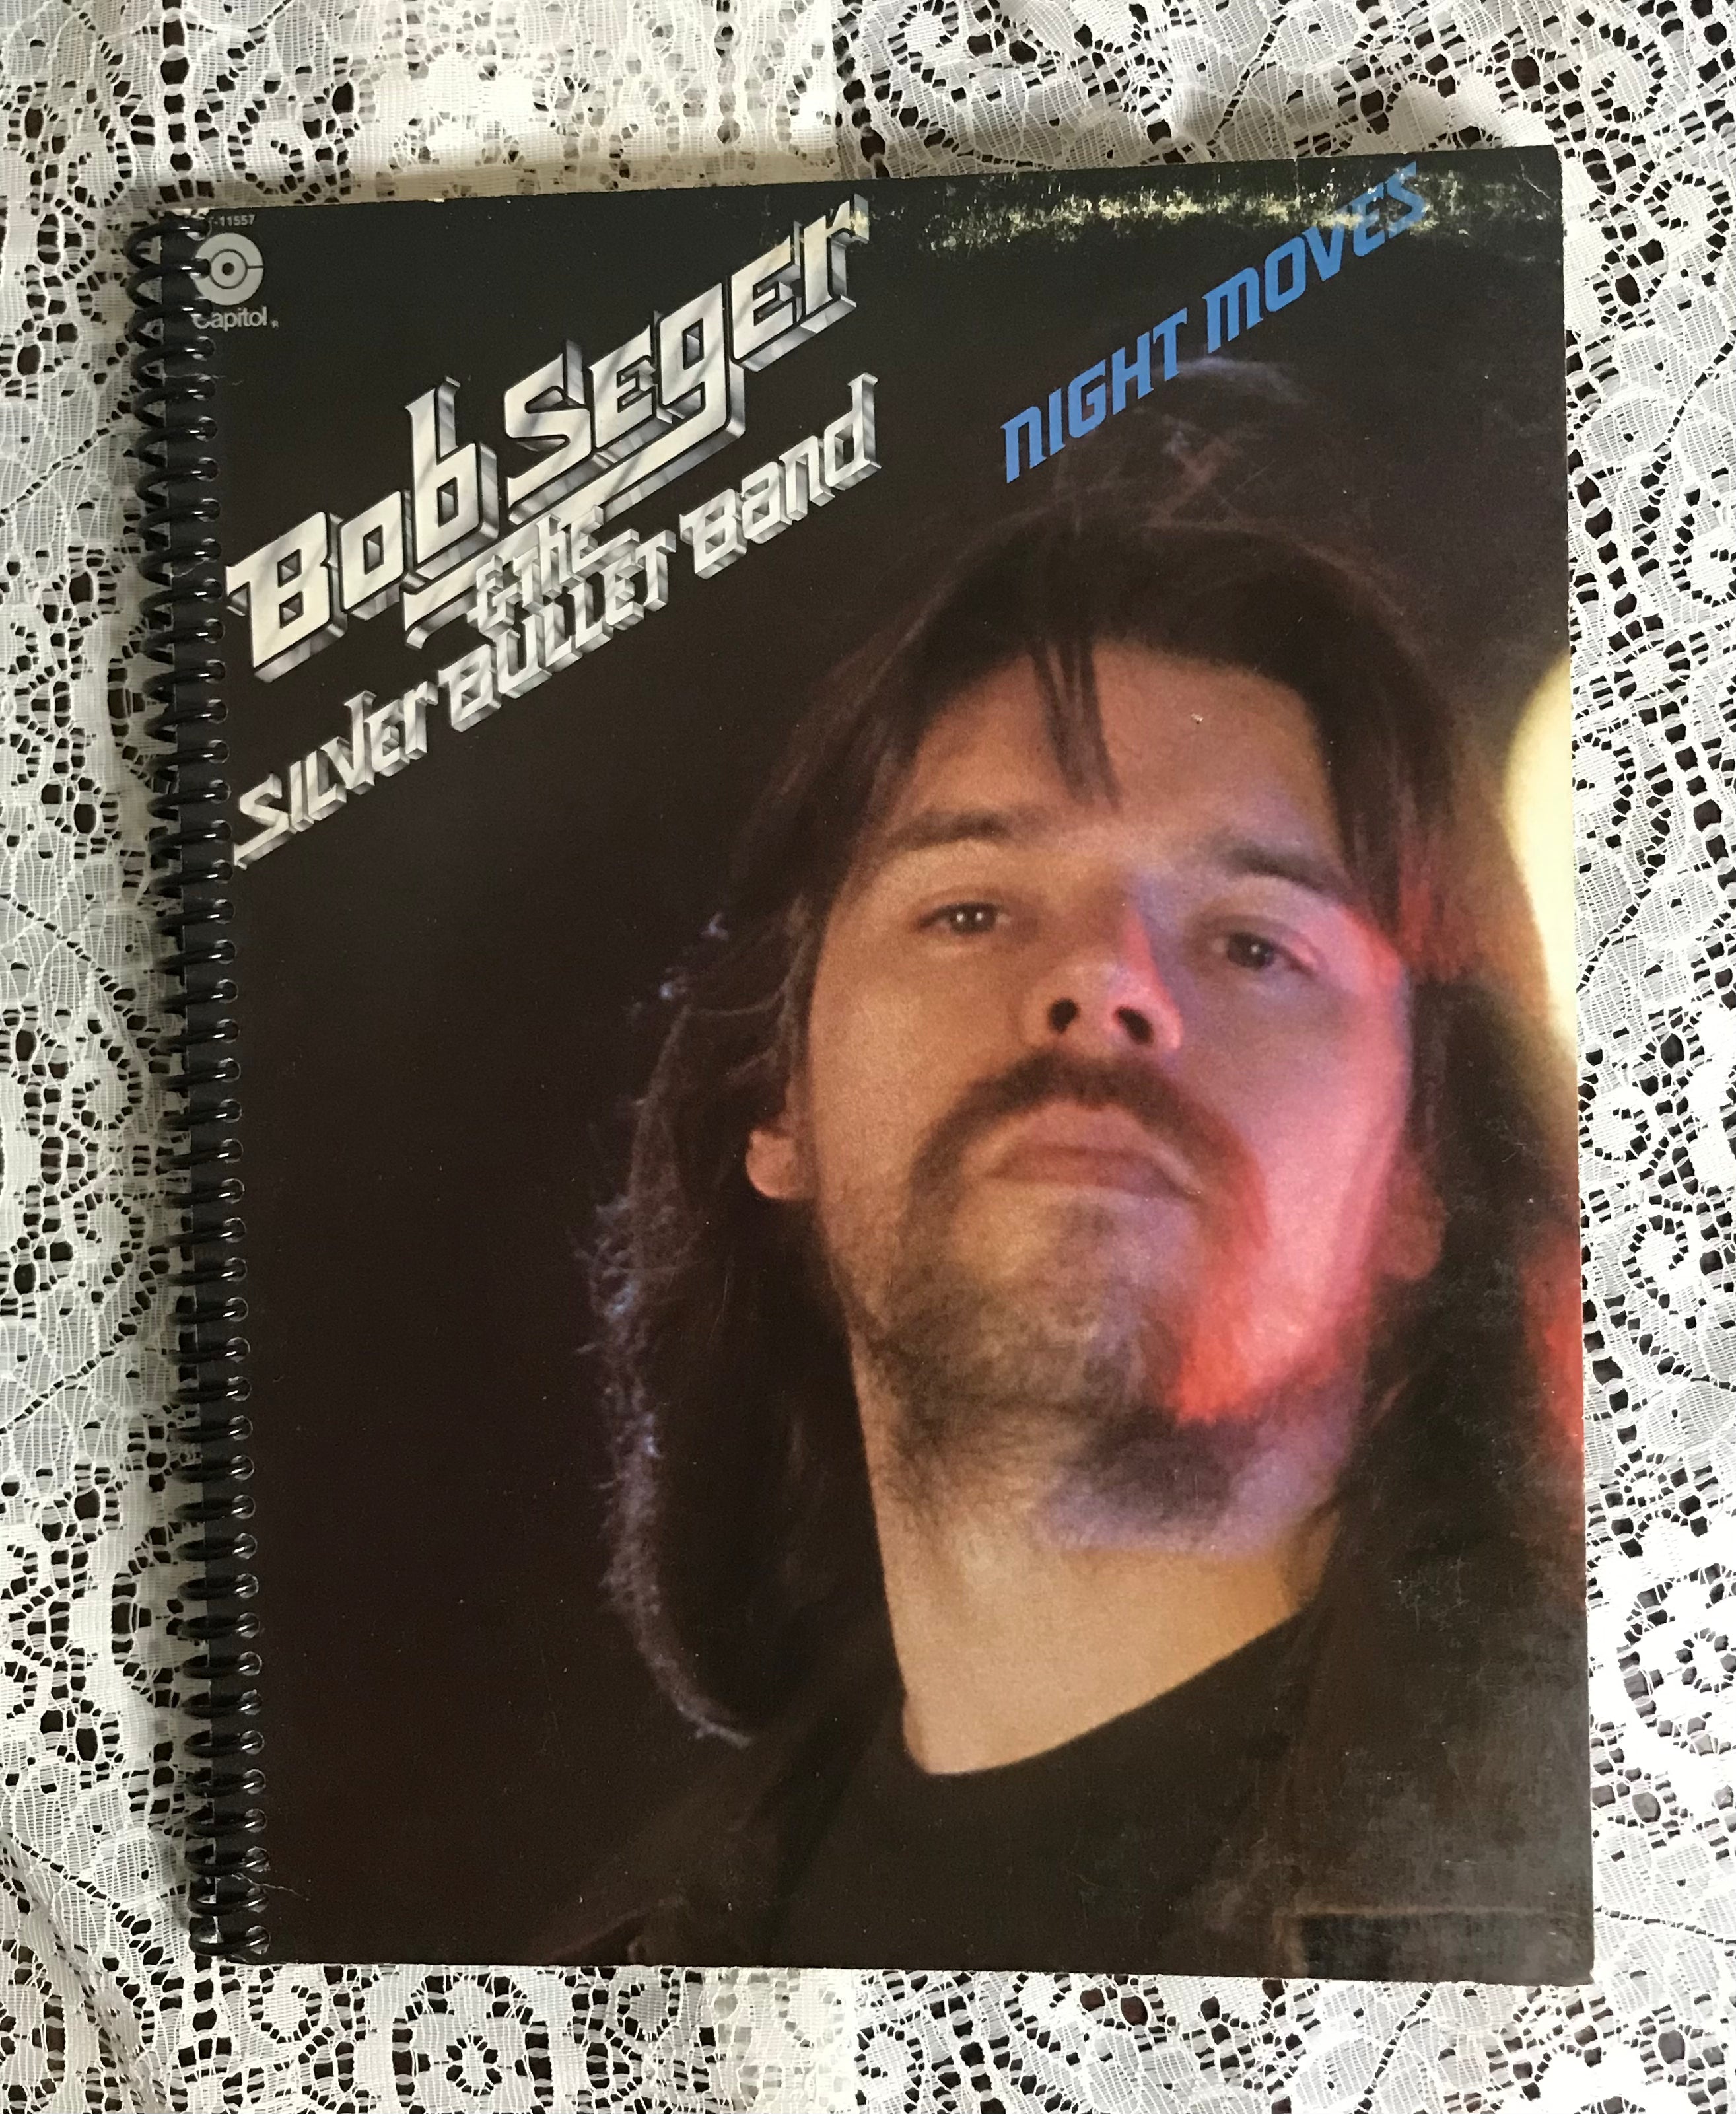 Bob Seger and the Silver Bullet Band Album Cover Notebook